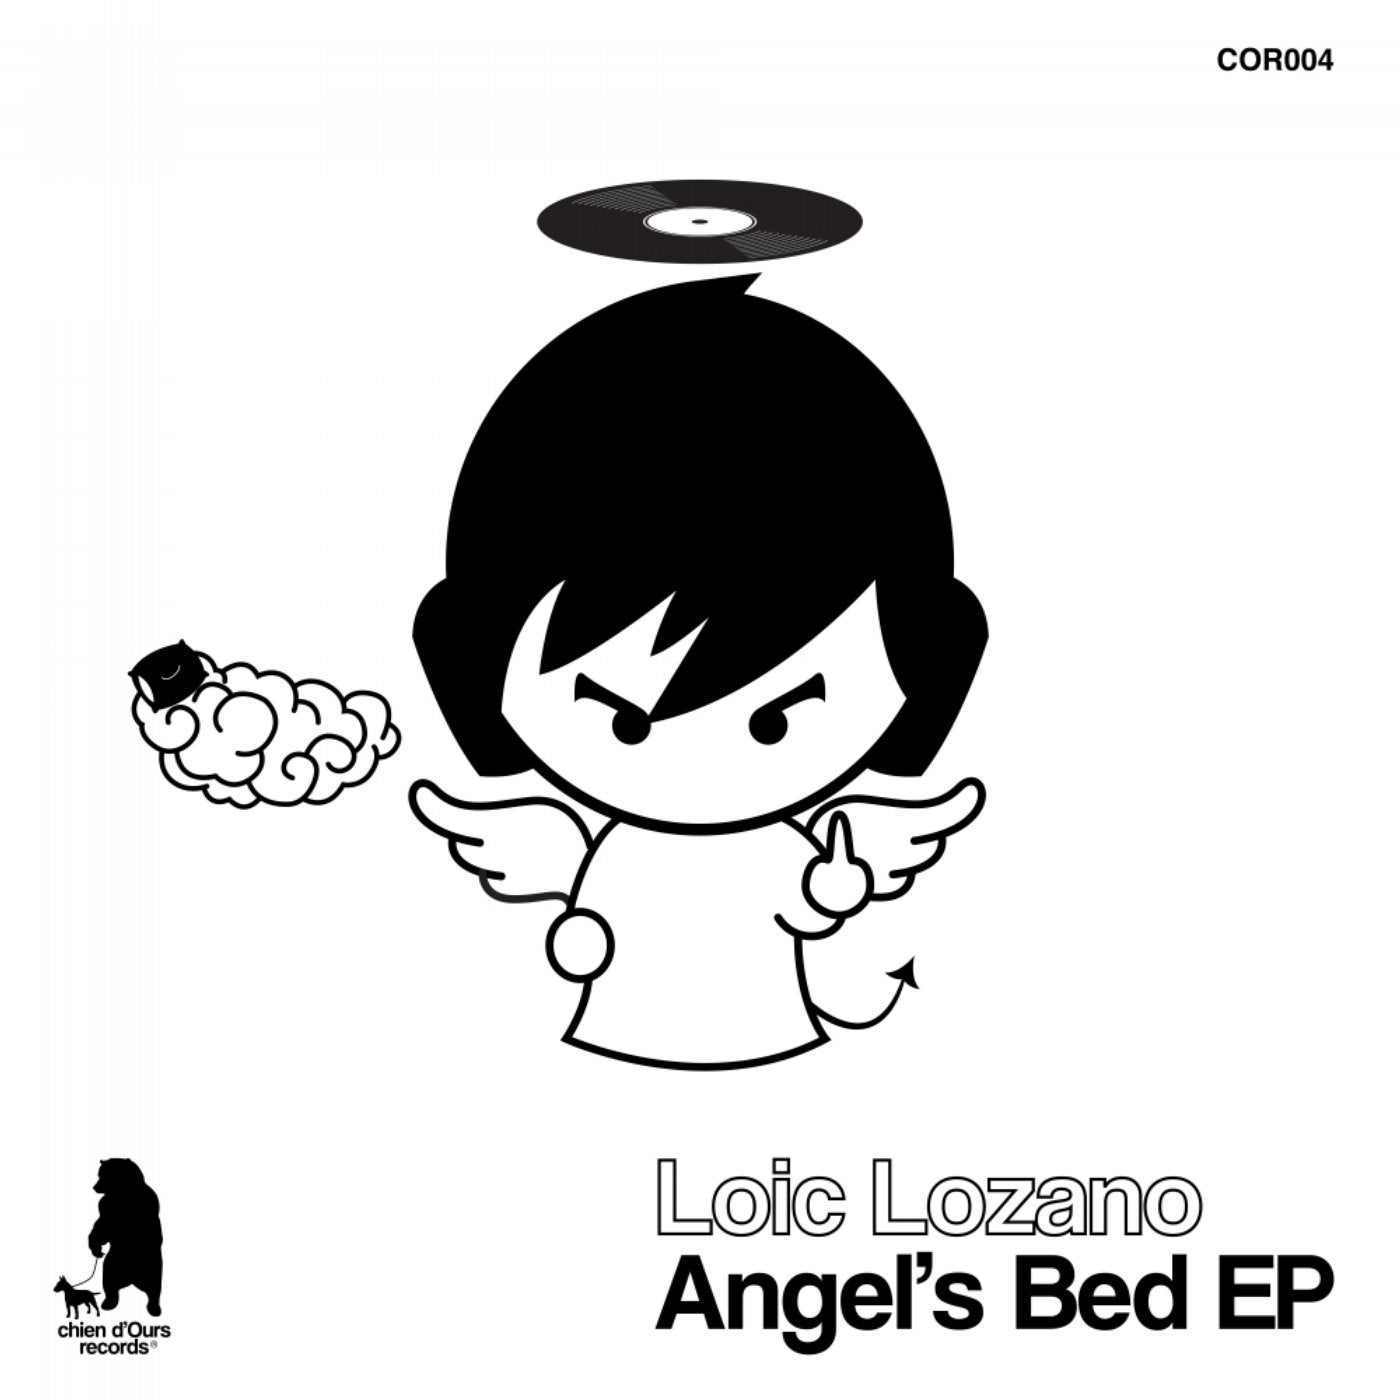 Angel's Bed EP